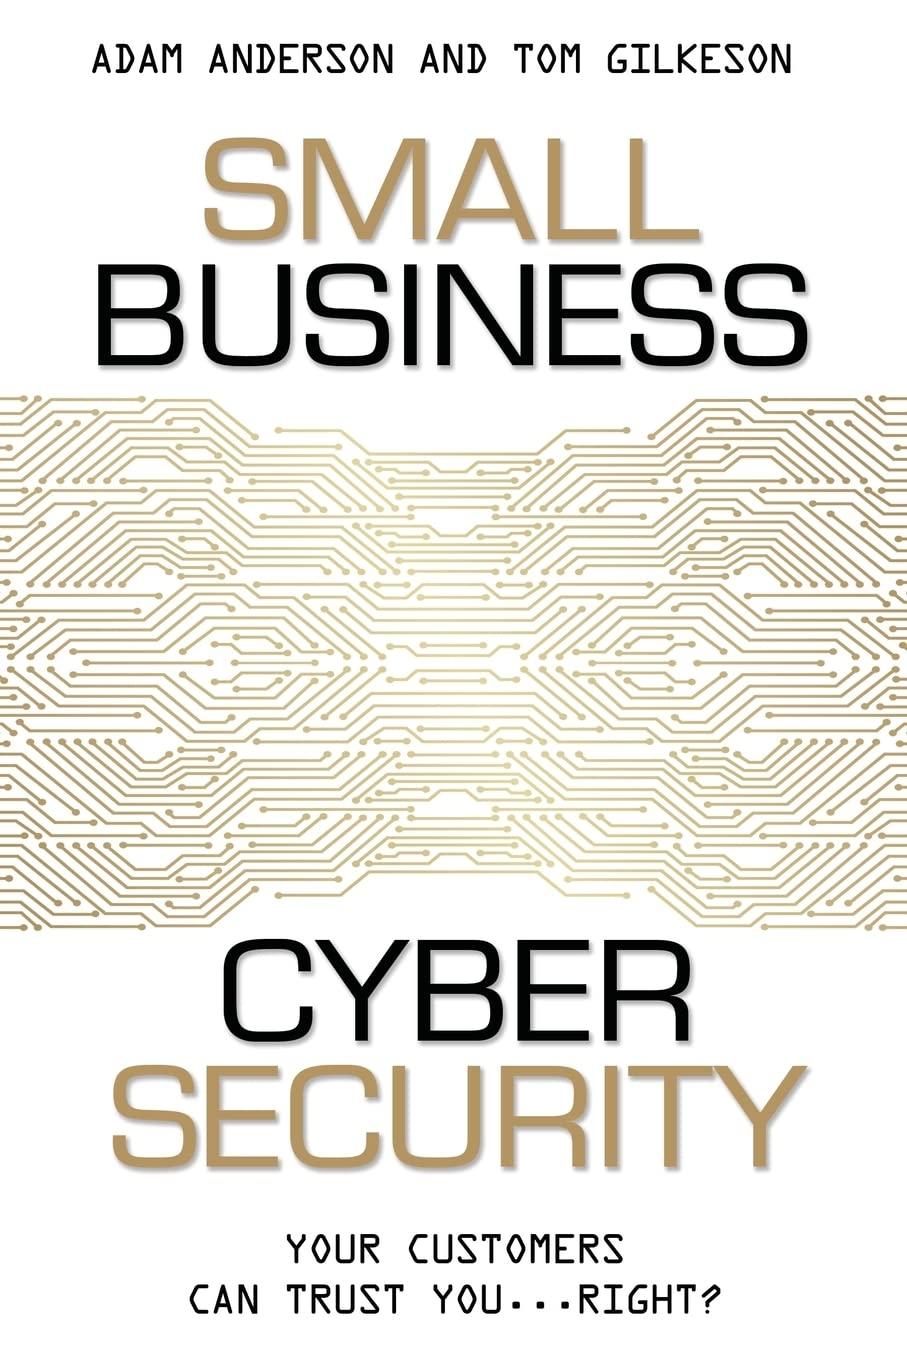 small business cyber security your customers can trust you...right? 1st edition adam anderson, tom gilkeson